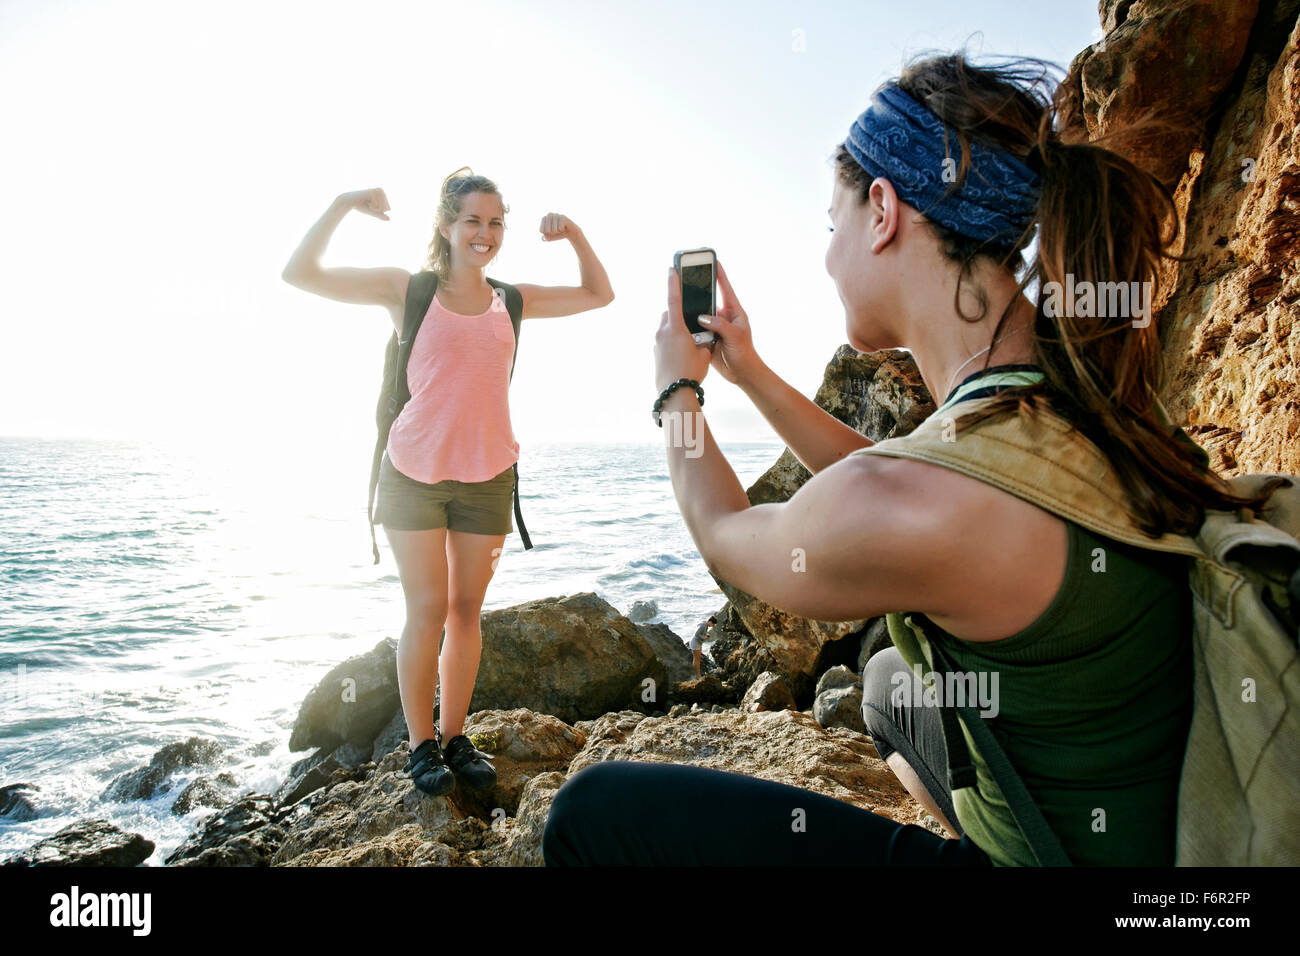 Woman photographing friend outdoors Stock Photo